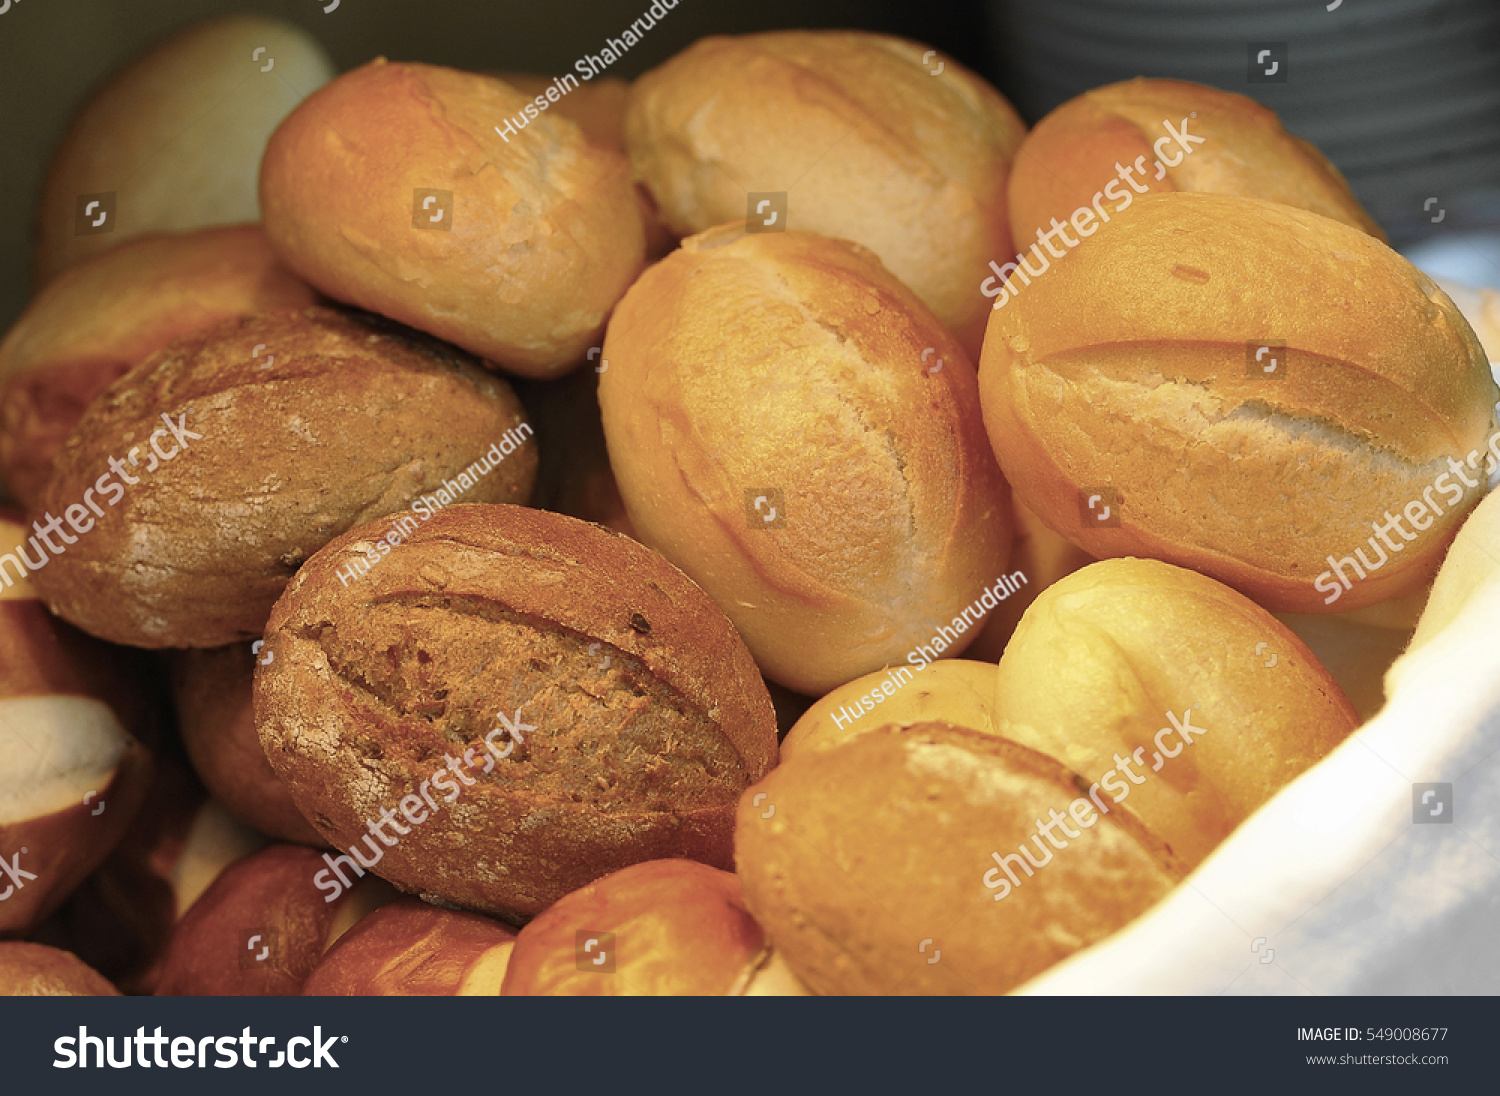 Assorted bread in a basket #549008677